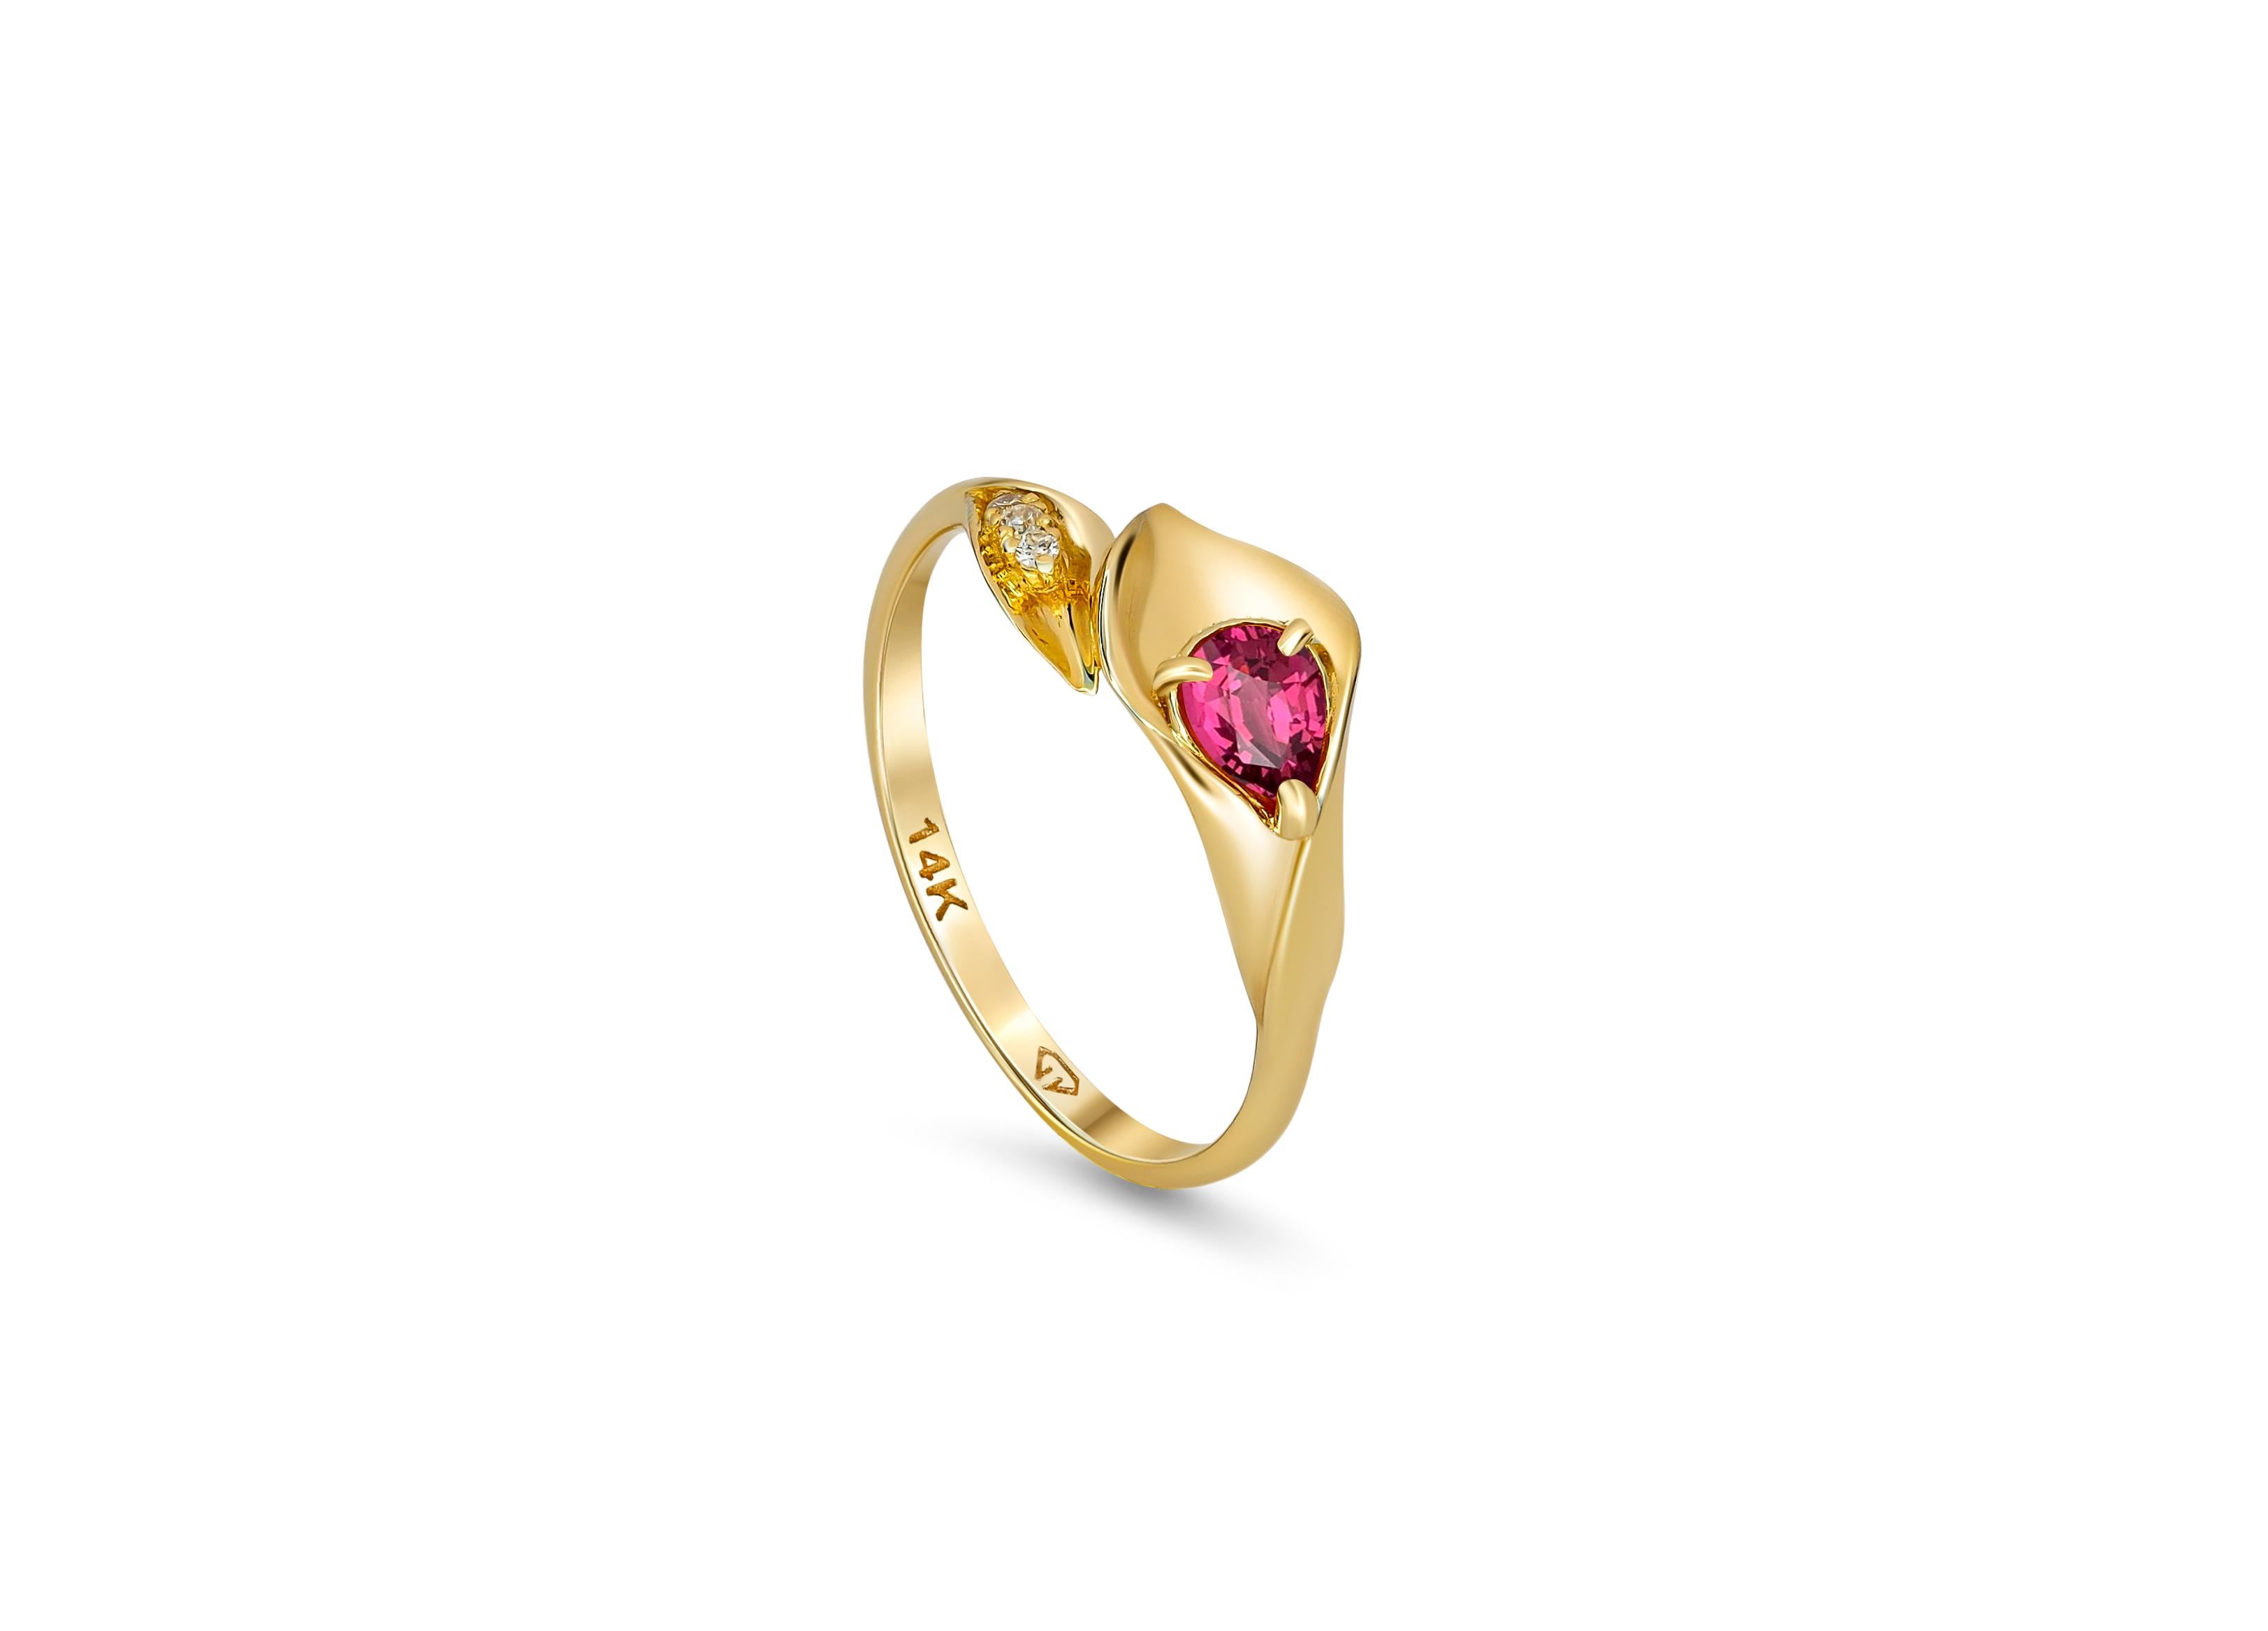 Pear Cut Lily Calla Gold Ring, 14 Karat Gold Ring with Garnet and Diamonds For Sale